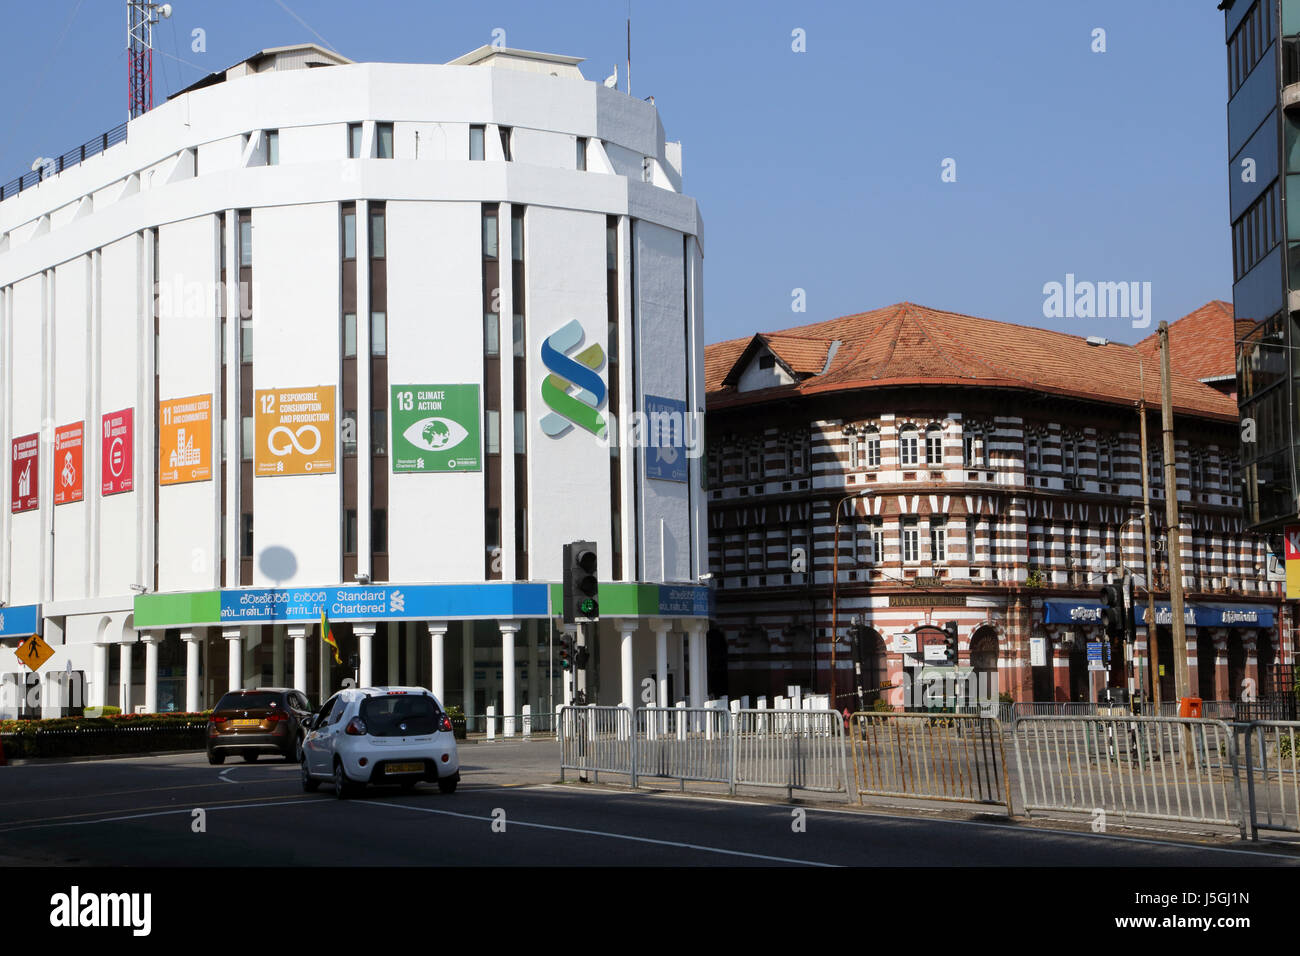 Fort Colombo Sri Lanka modern and old buildings Standard Chartered Bank and Lankam Plantation House Stock Photo